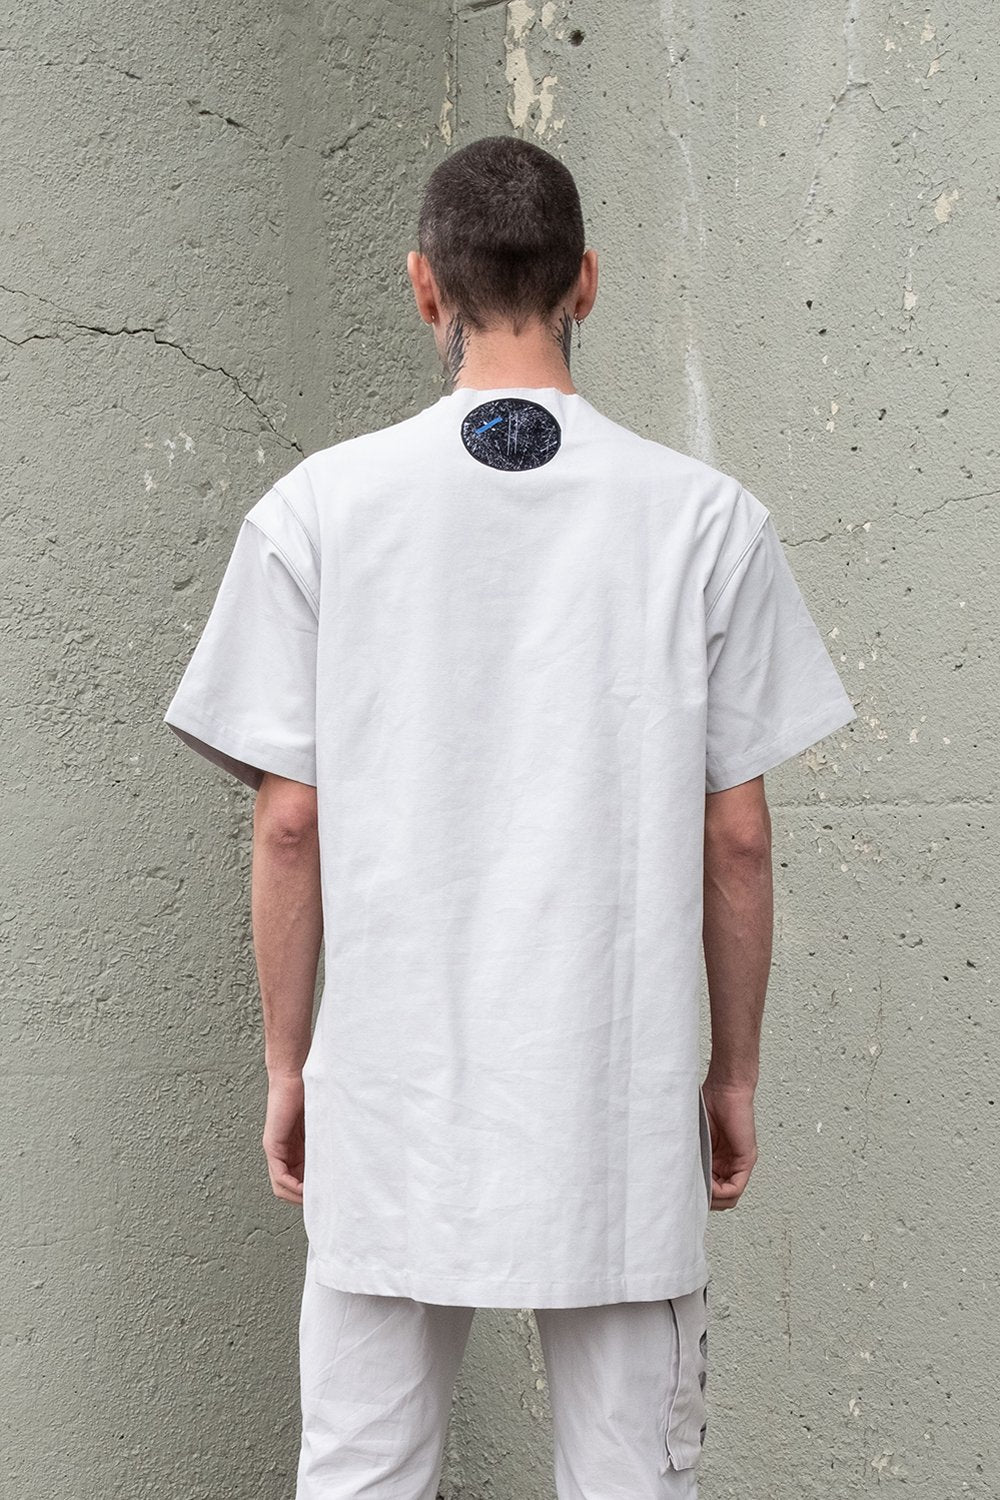 Grey Unisex Tunic Shirt. Grey Detachable Circular Tote. 100% Cotton. Designed in Madras, Made in India  | BISKIT UNISEX CLOTHING LABEL